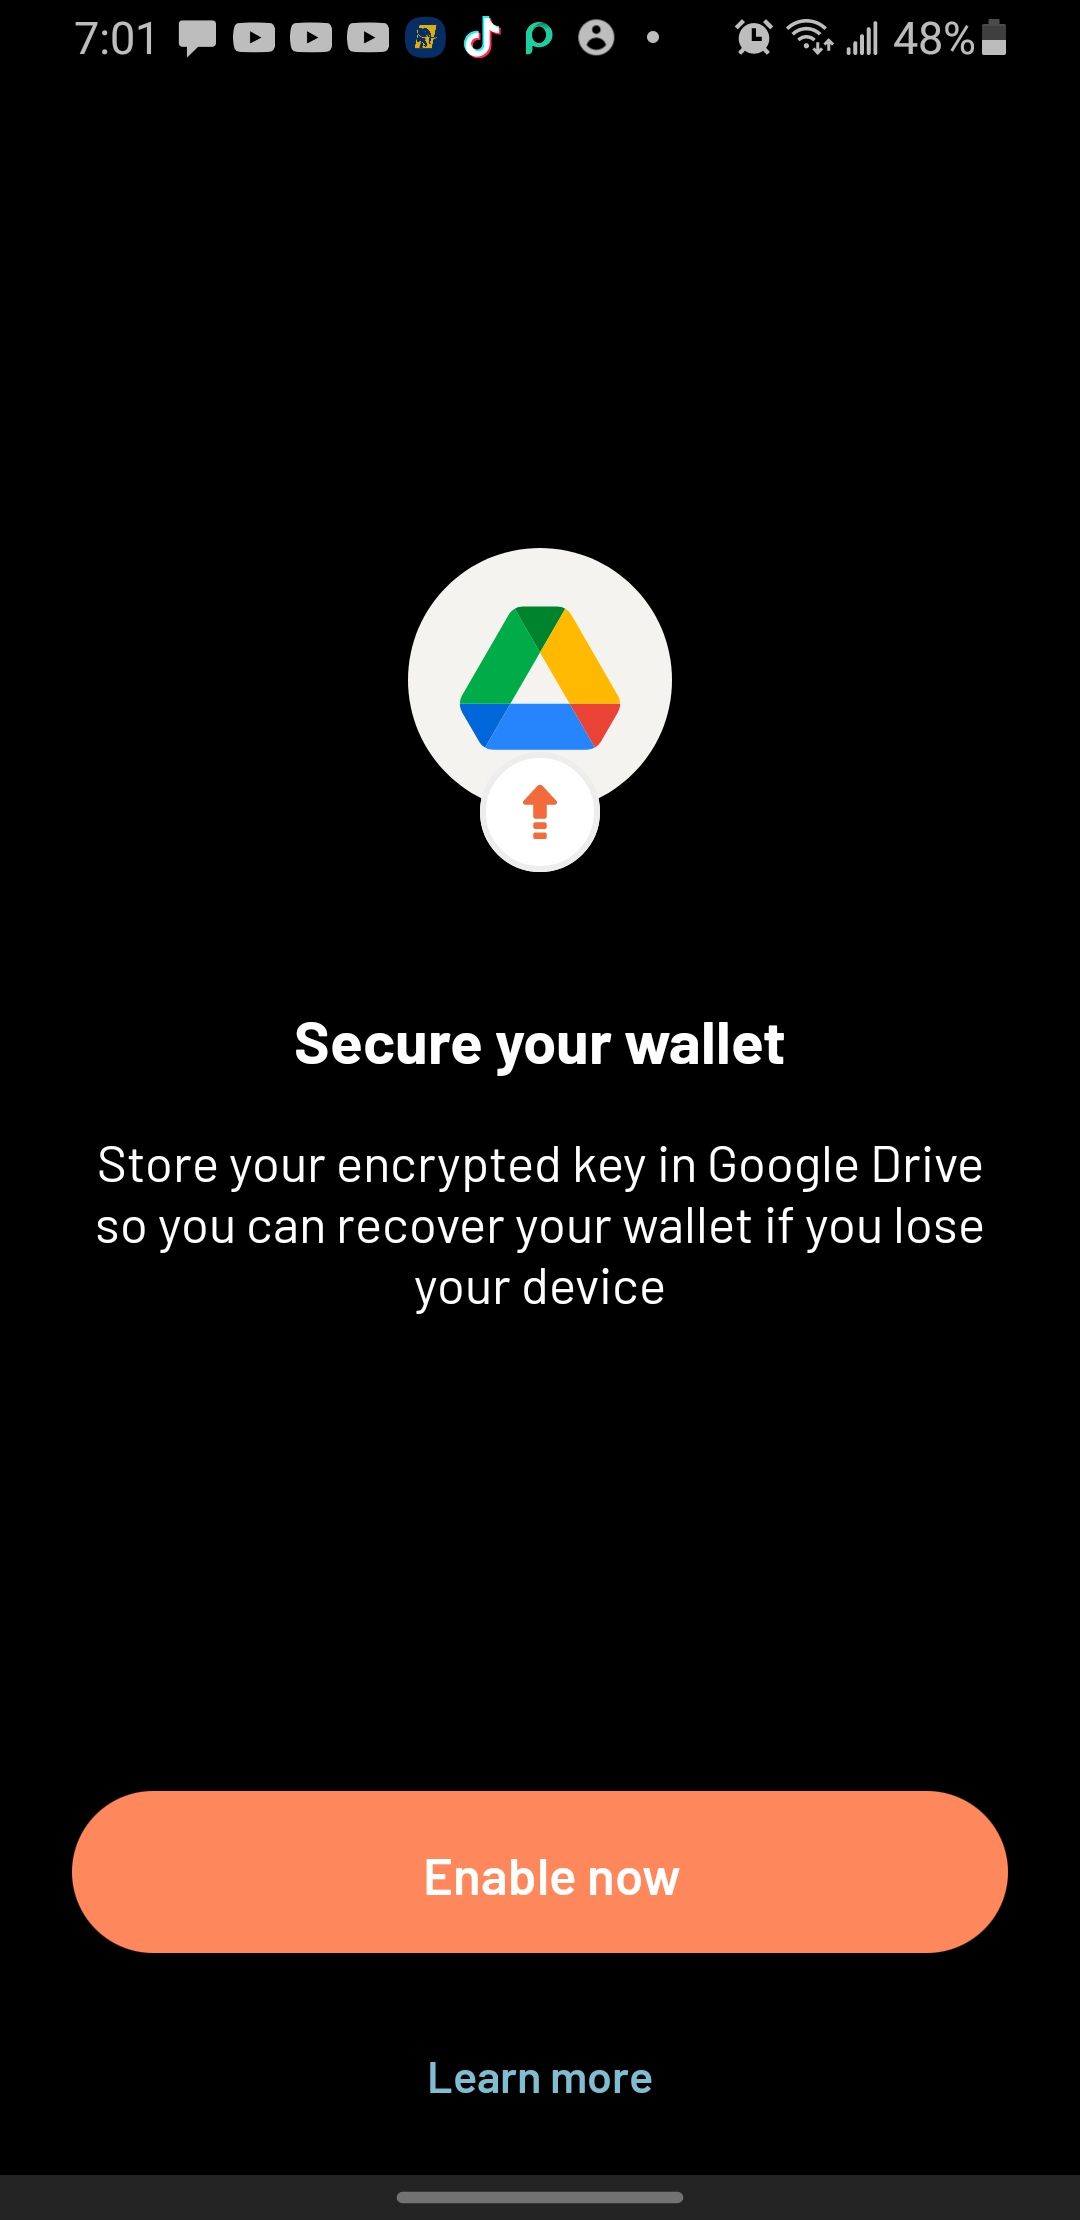 Secure your wallet by storing encrypted key on Google Drive on Argent app